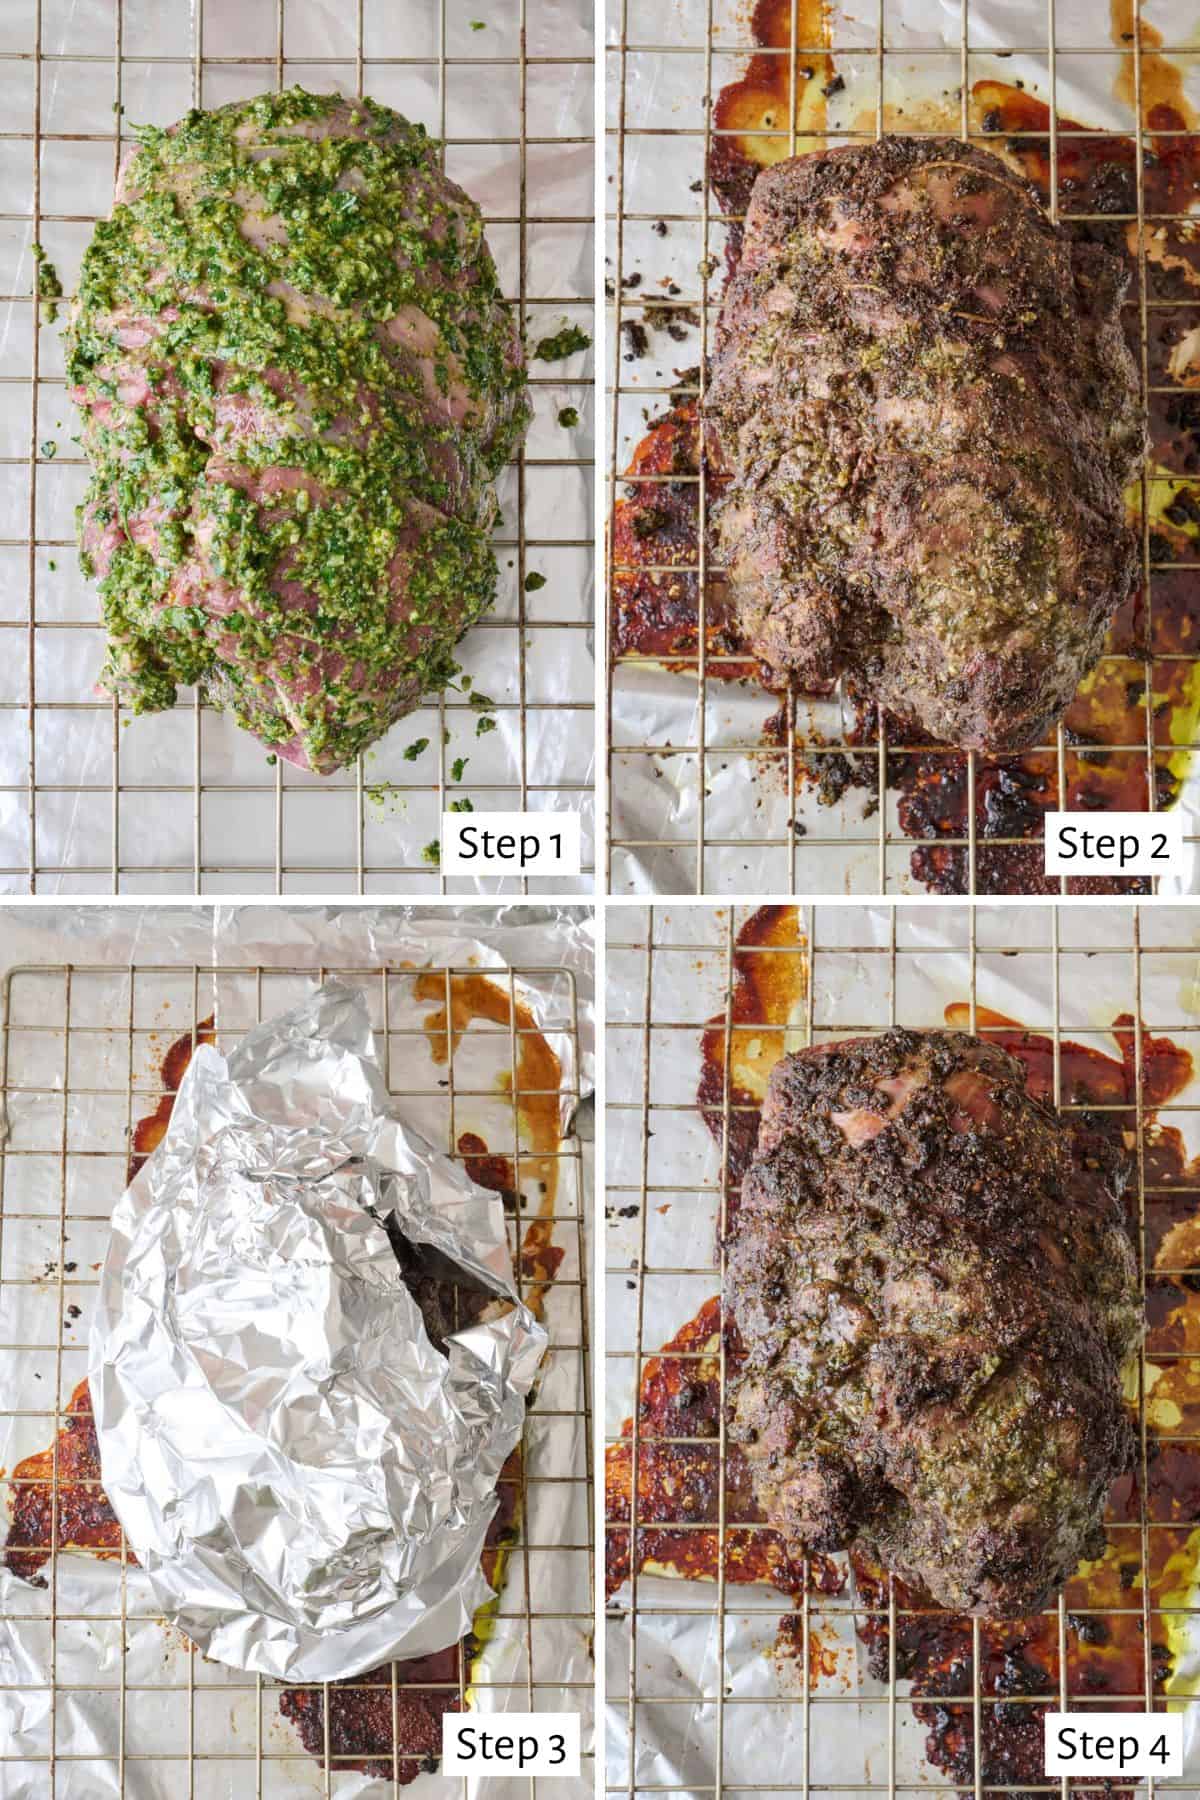 4-image collage roasting lamb: 1 - Roast before cooking with remaining paste rubbed over the outside; 2 - After cooking; 3 - Roast tented with foil; 4 - After browning.